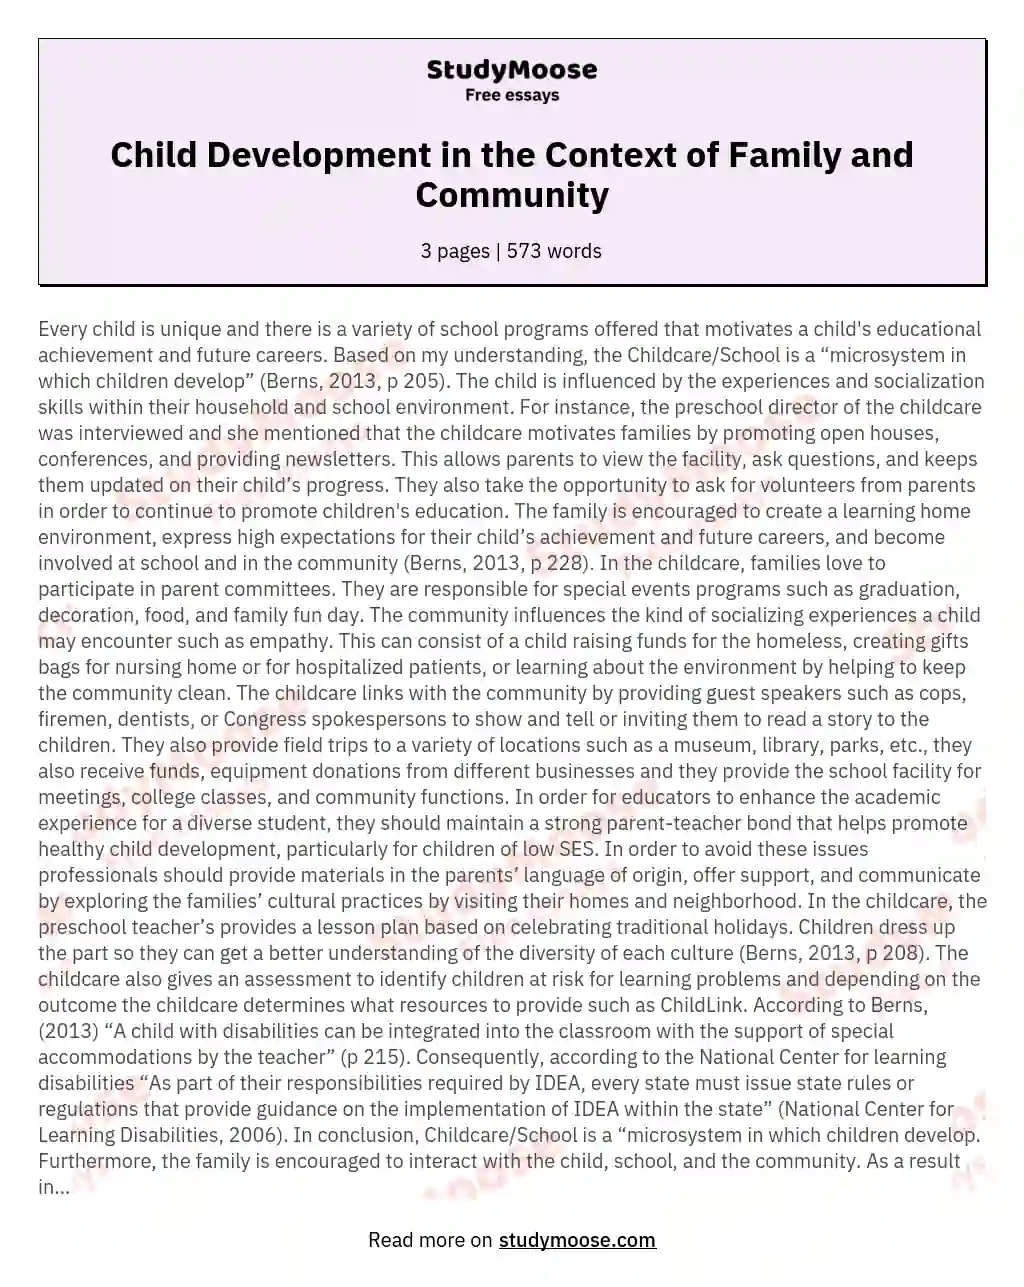 Child Development in the Context of Family and Community essay